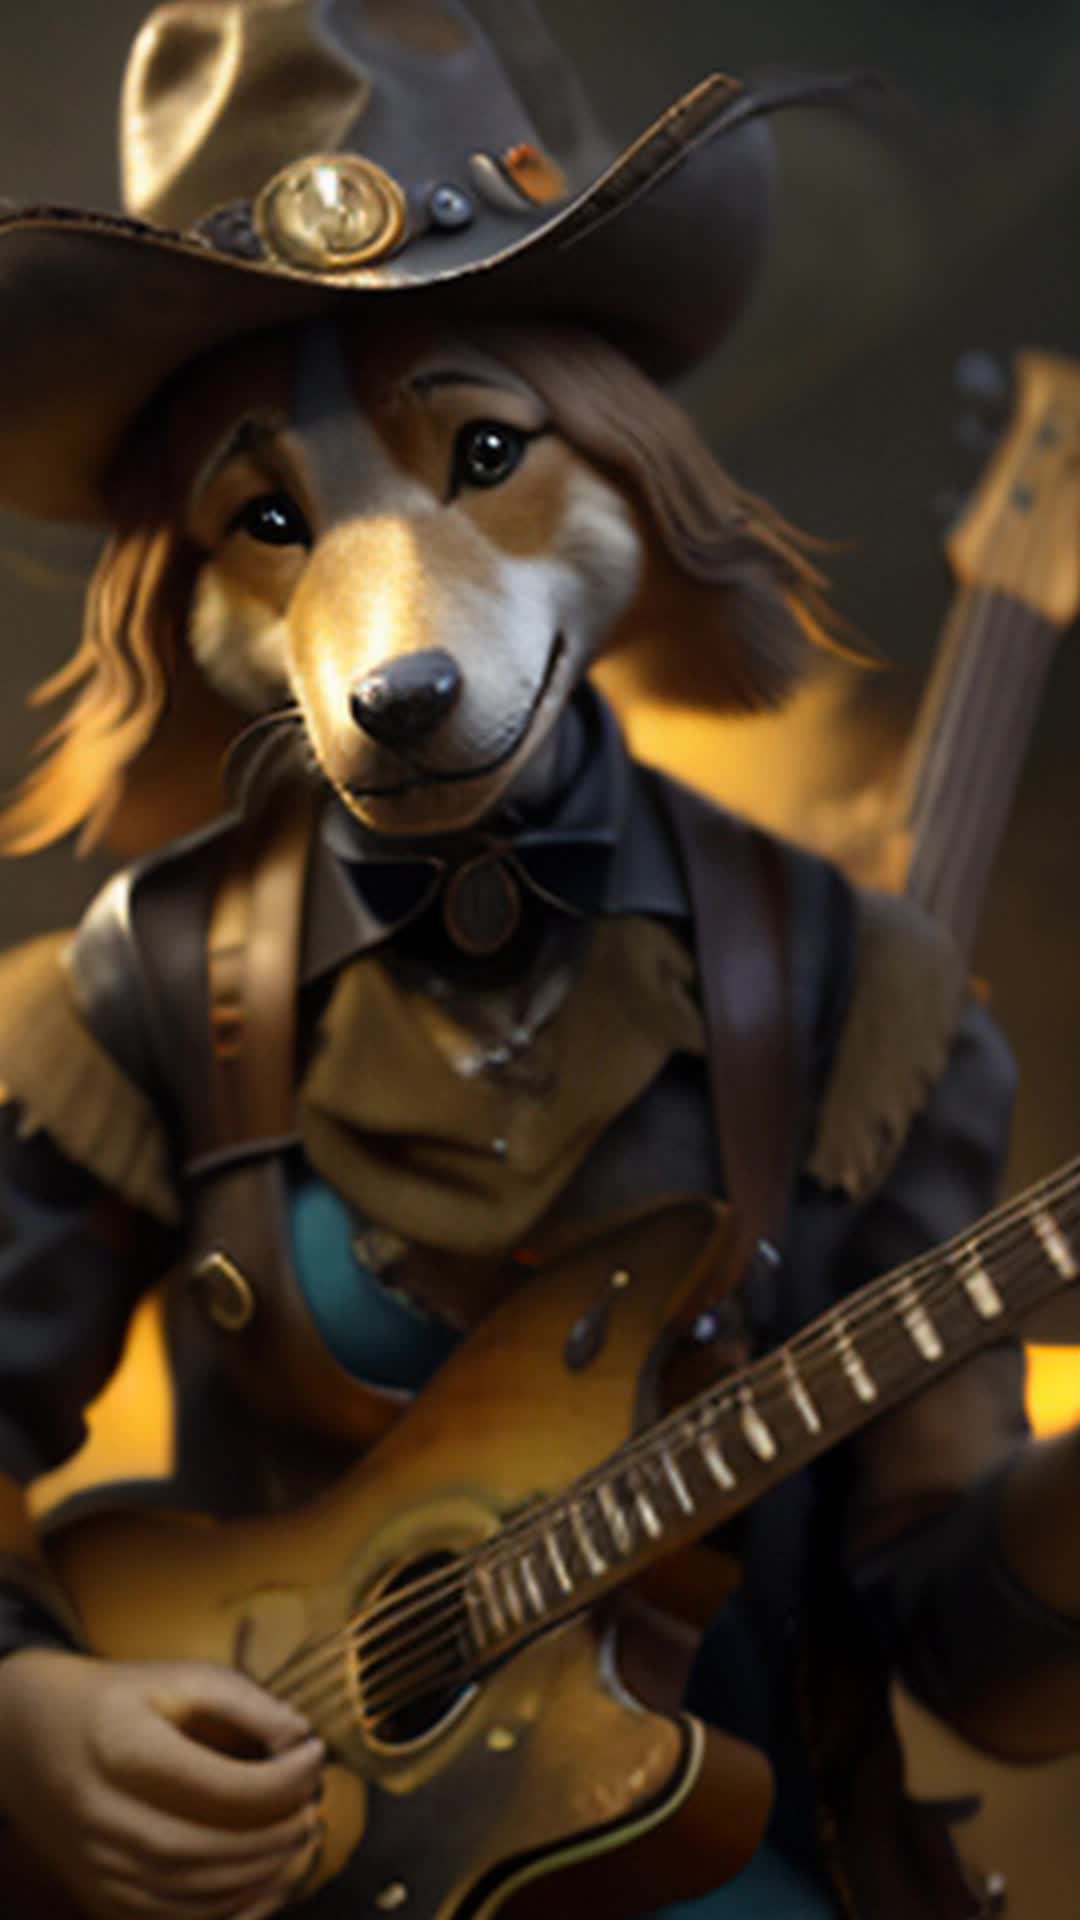 Cowboy Dingo, steampunk style, intricate mechanical gear outfit, playing guitar, glowing brass and copper details, steam rising softly, cybernetic enhancements, clockwork guitar with spinning gears, oil lamps casting warm light, Victorianera influence, misty atmosphere, soft shadows, dramatic backlighting, full body shot, highly detailed, rendered by octane